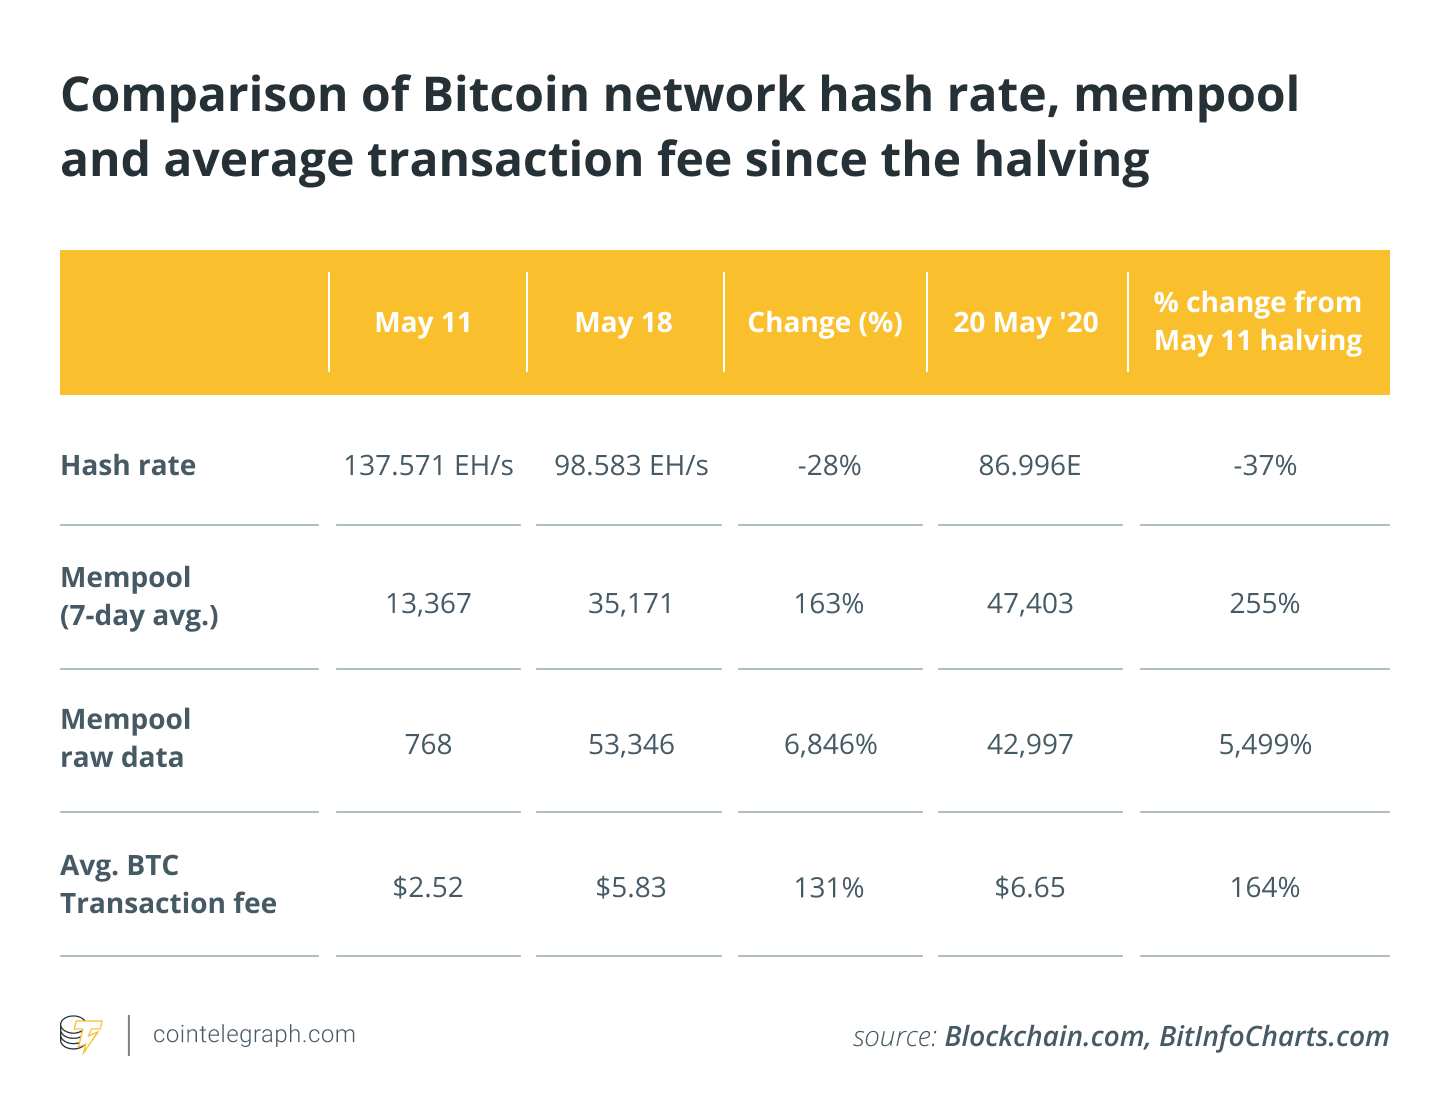 Comparison of Bitcoin network hash rate, mempool and average transaction fee since the halving